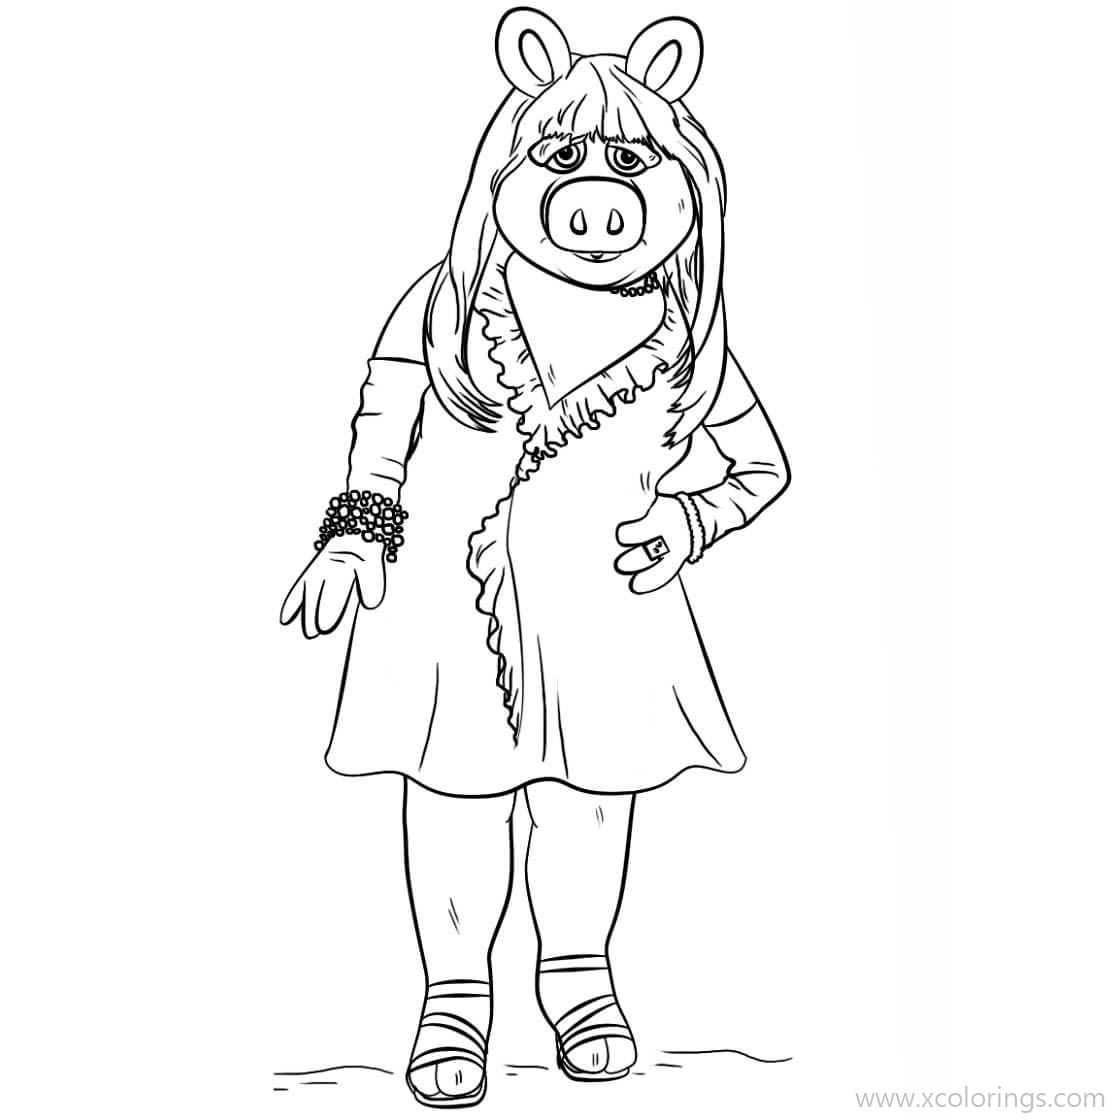 Free Miss Piggy Coloring Pages printable